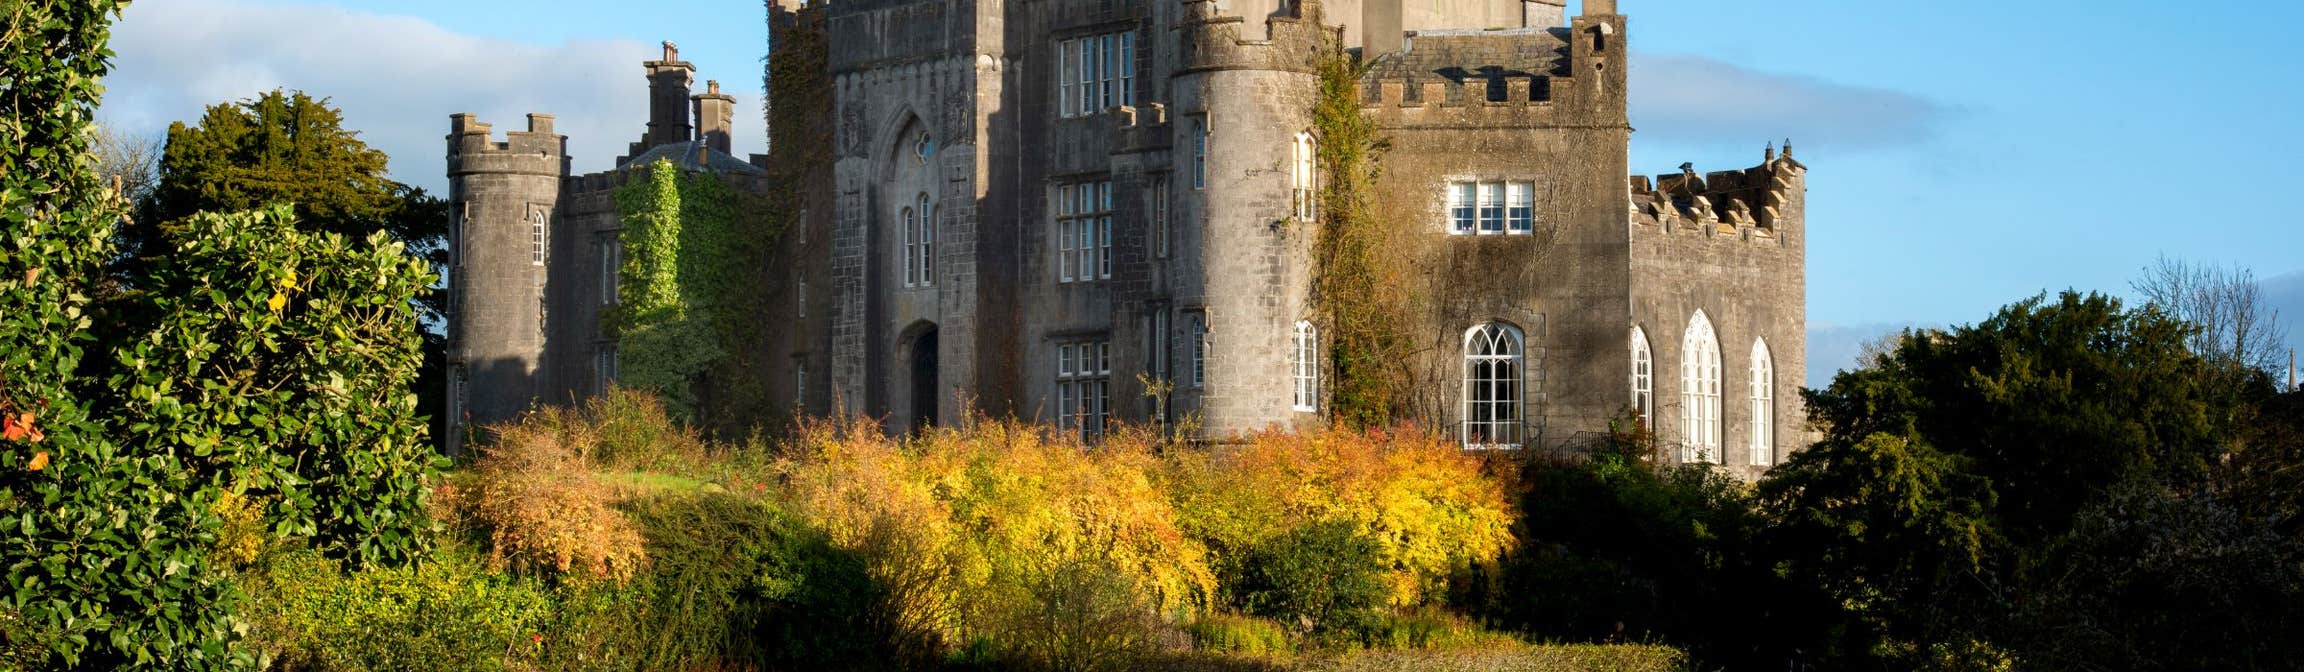 Image of Birr Castle in County Offaly